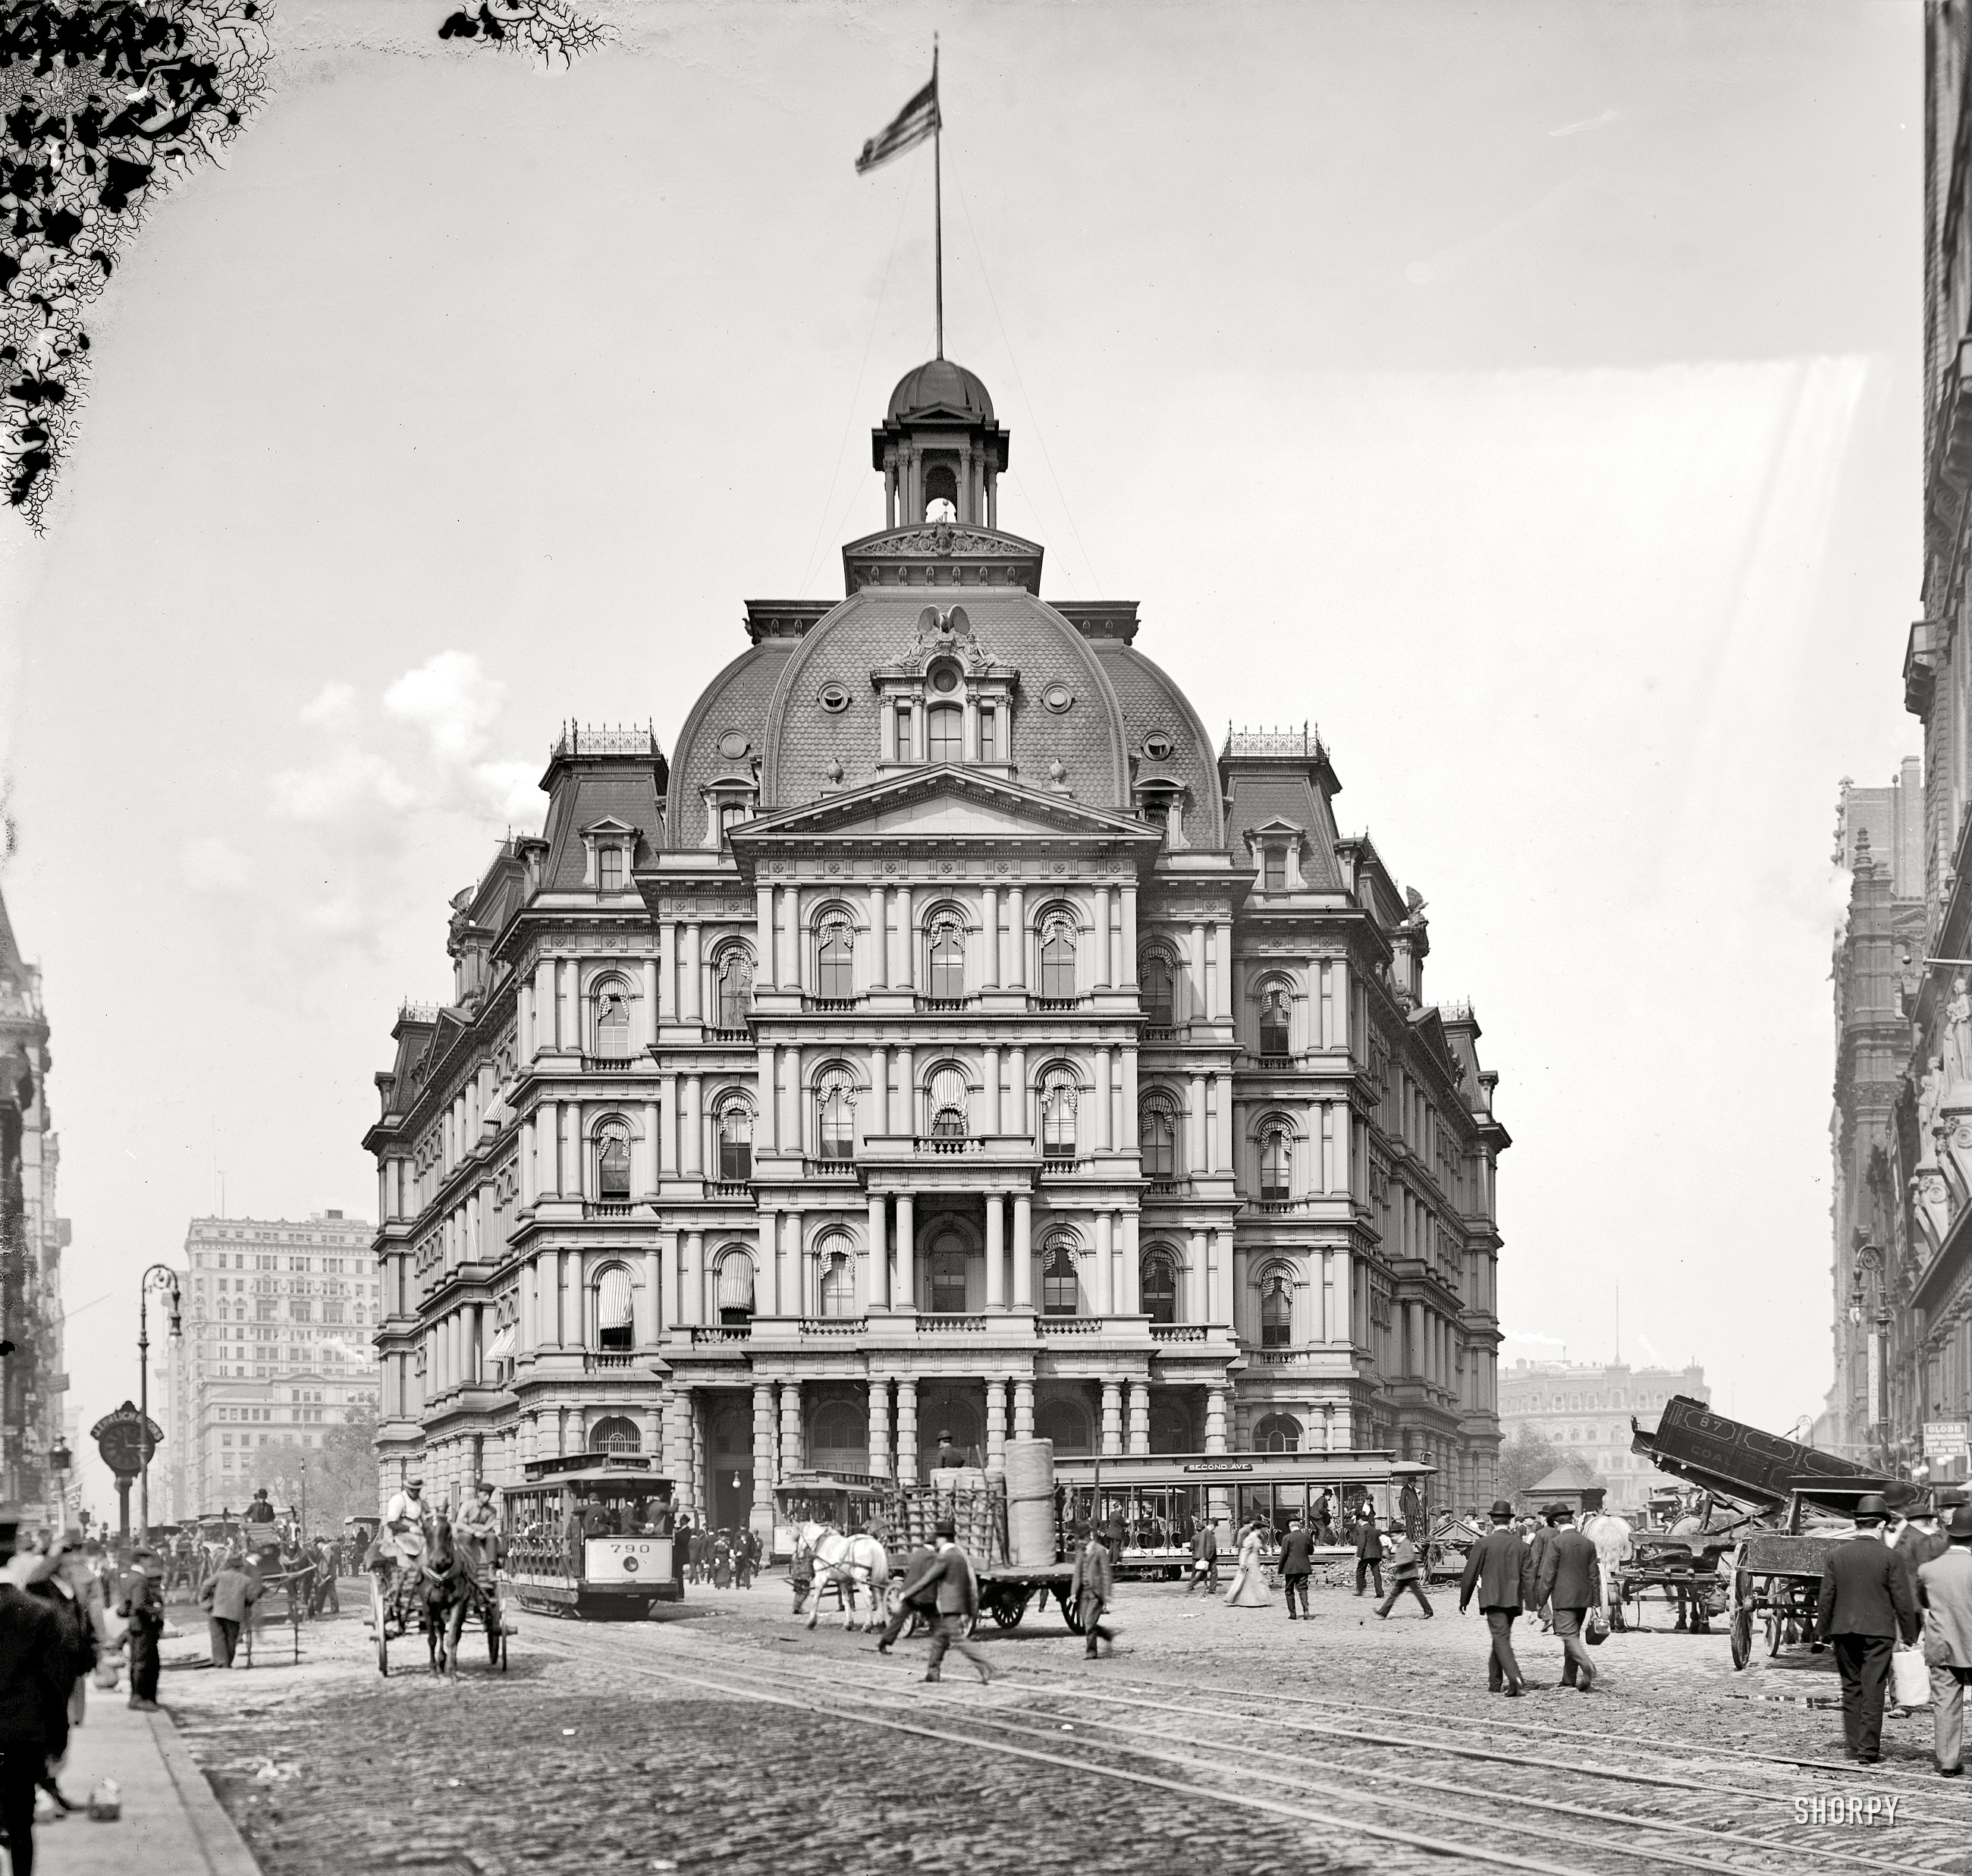 New York circa 1905. "City Hall Post Office." Designed by Alfred Mullett, completed in 1880 and demolished in 1939, the building was derided as "Mullett's Monstrosity" by its numerous critics. Detroit Publishing Co. View full size.